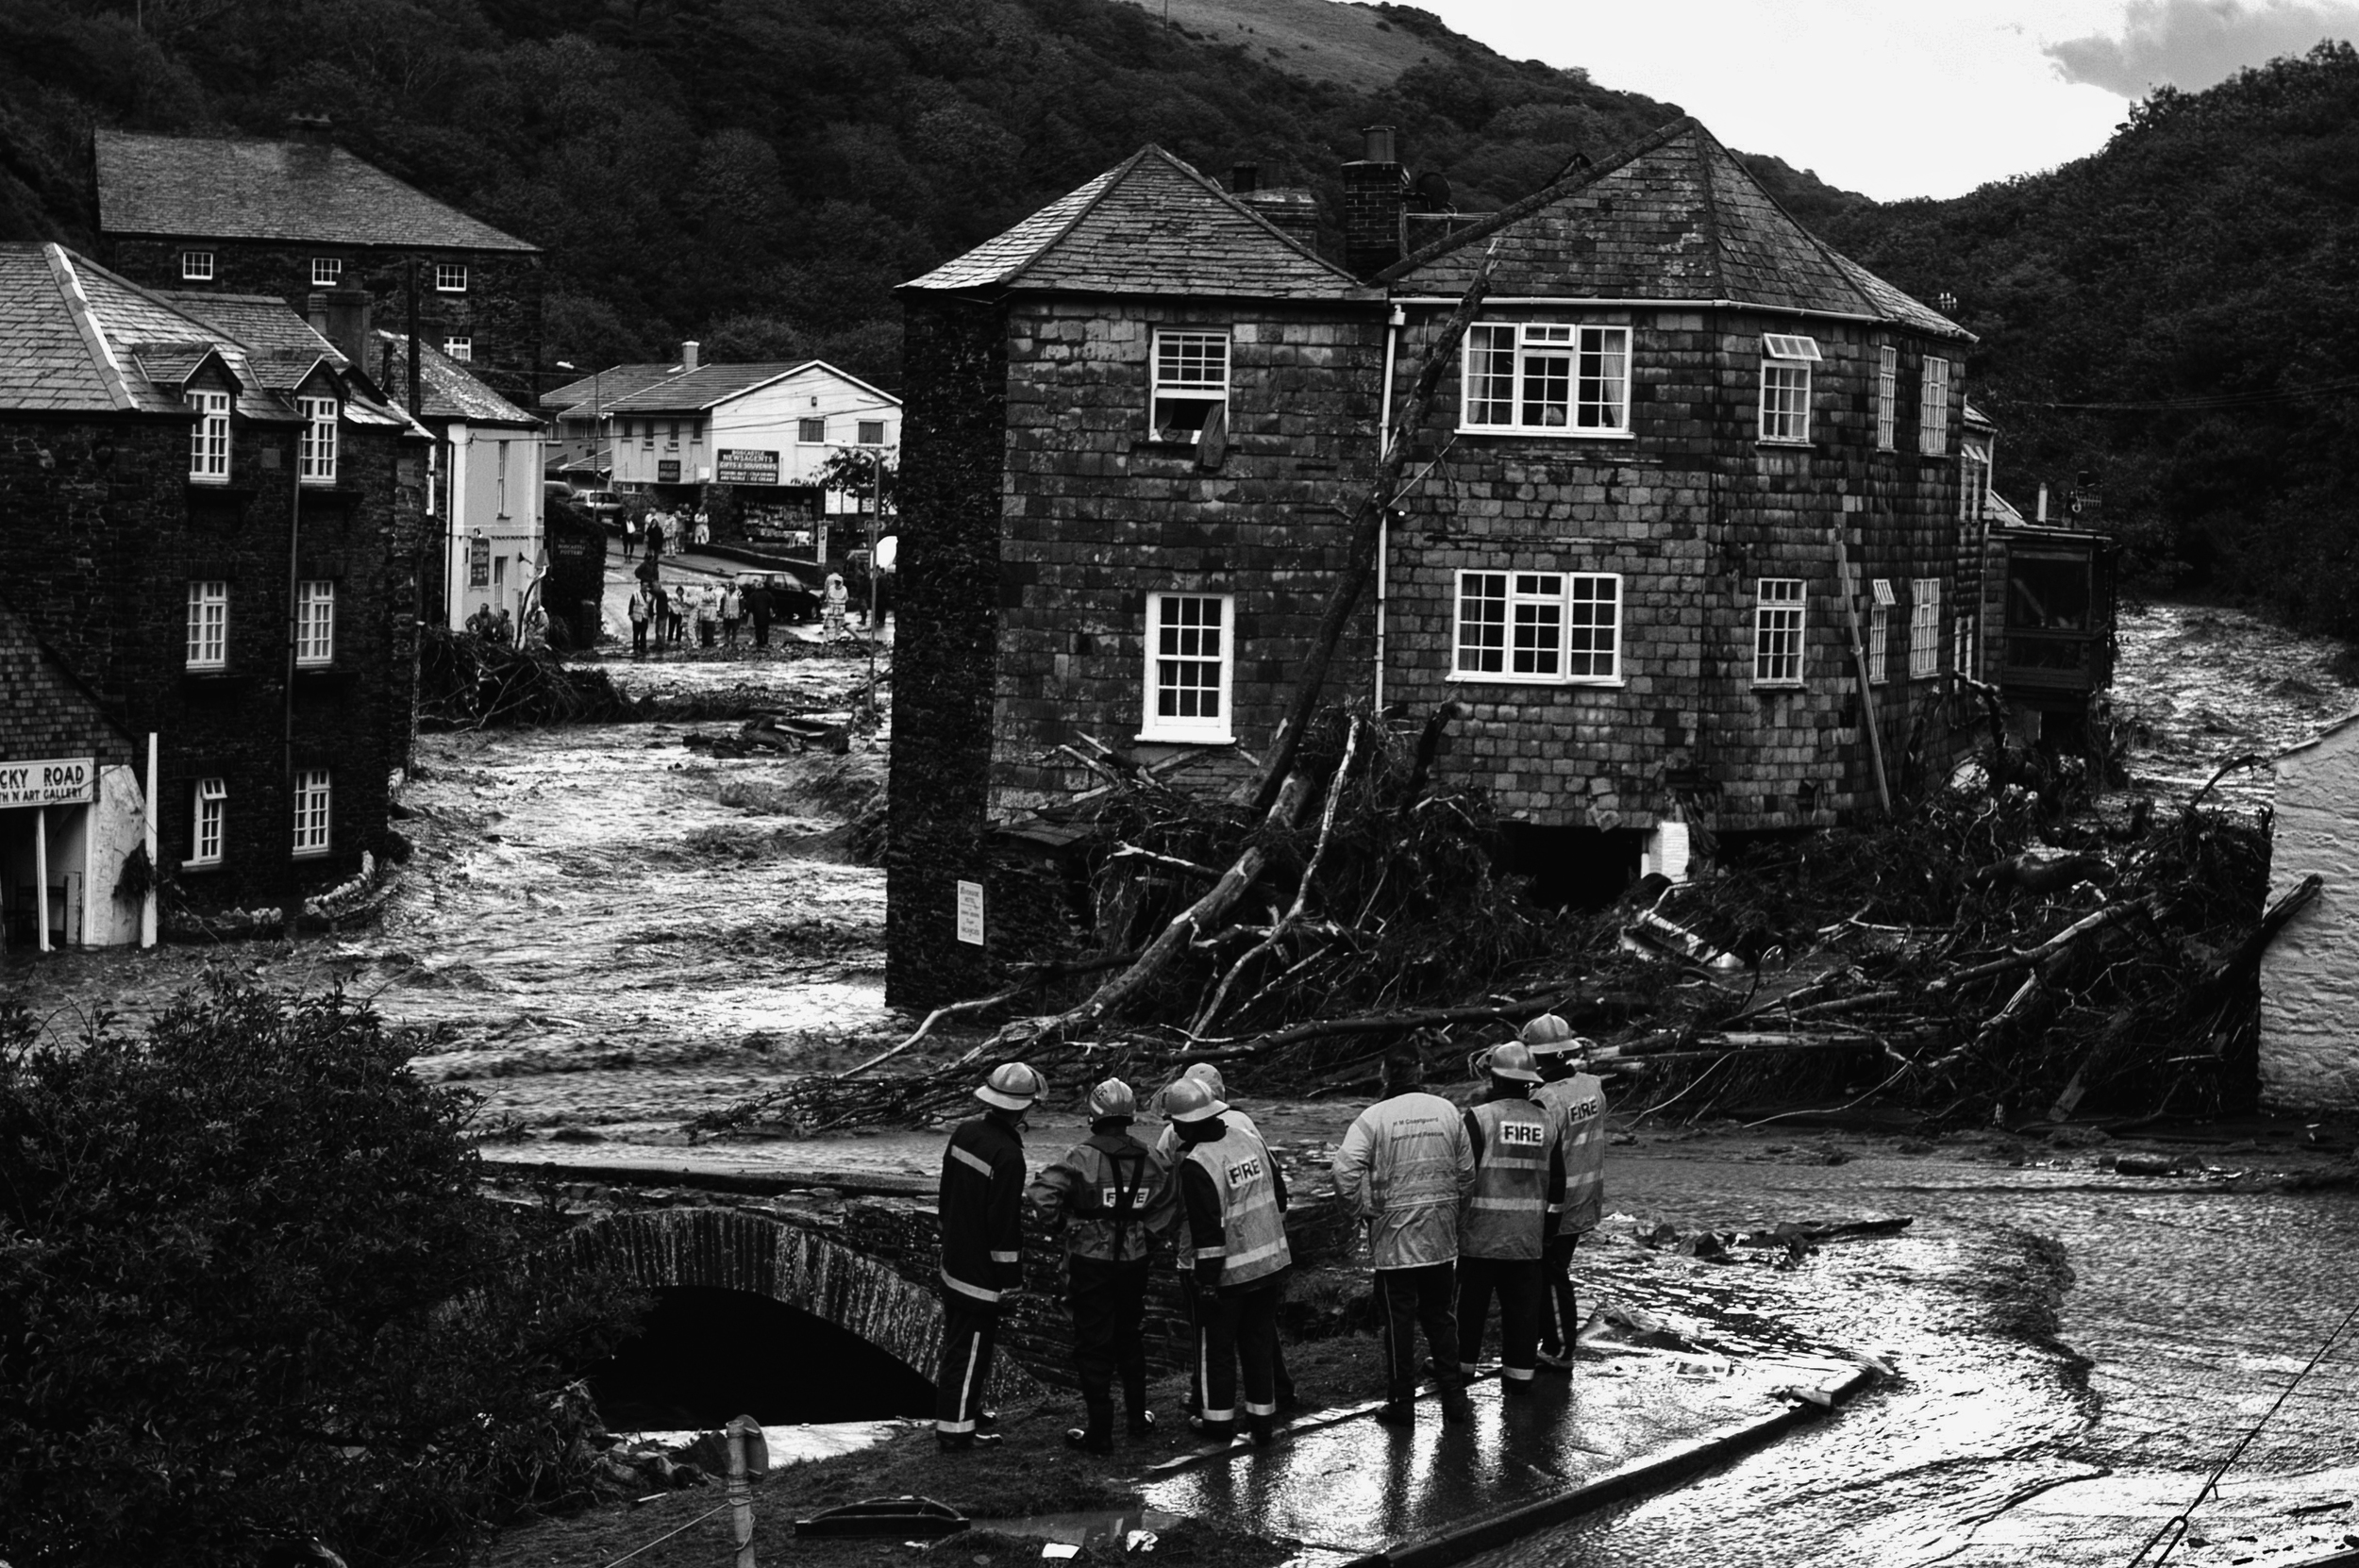   Fire brigade search and rescue fast rope teams looking for flood victims in Boscastle, Cornwall, August 16, 2004. (Photo/Mark Pearson)  